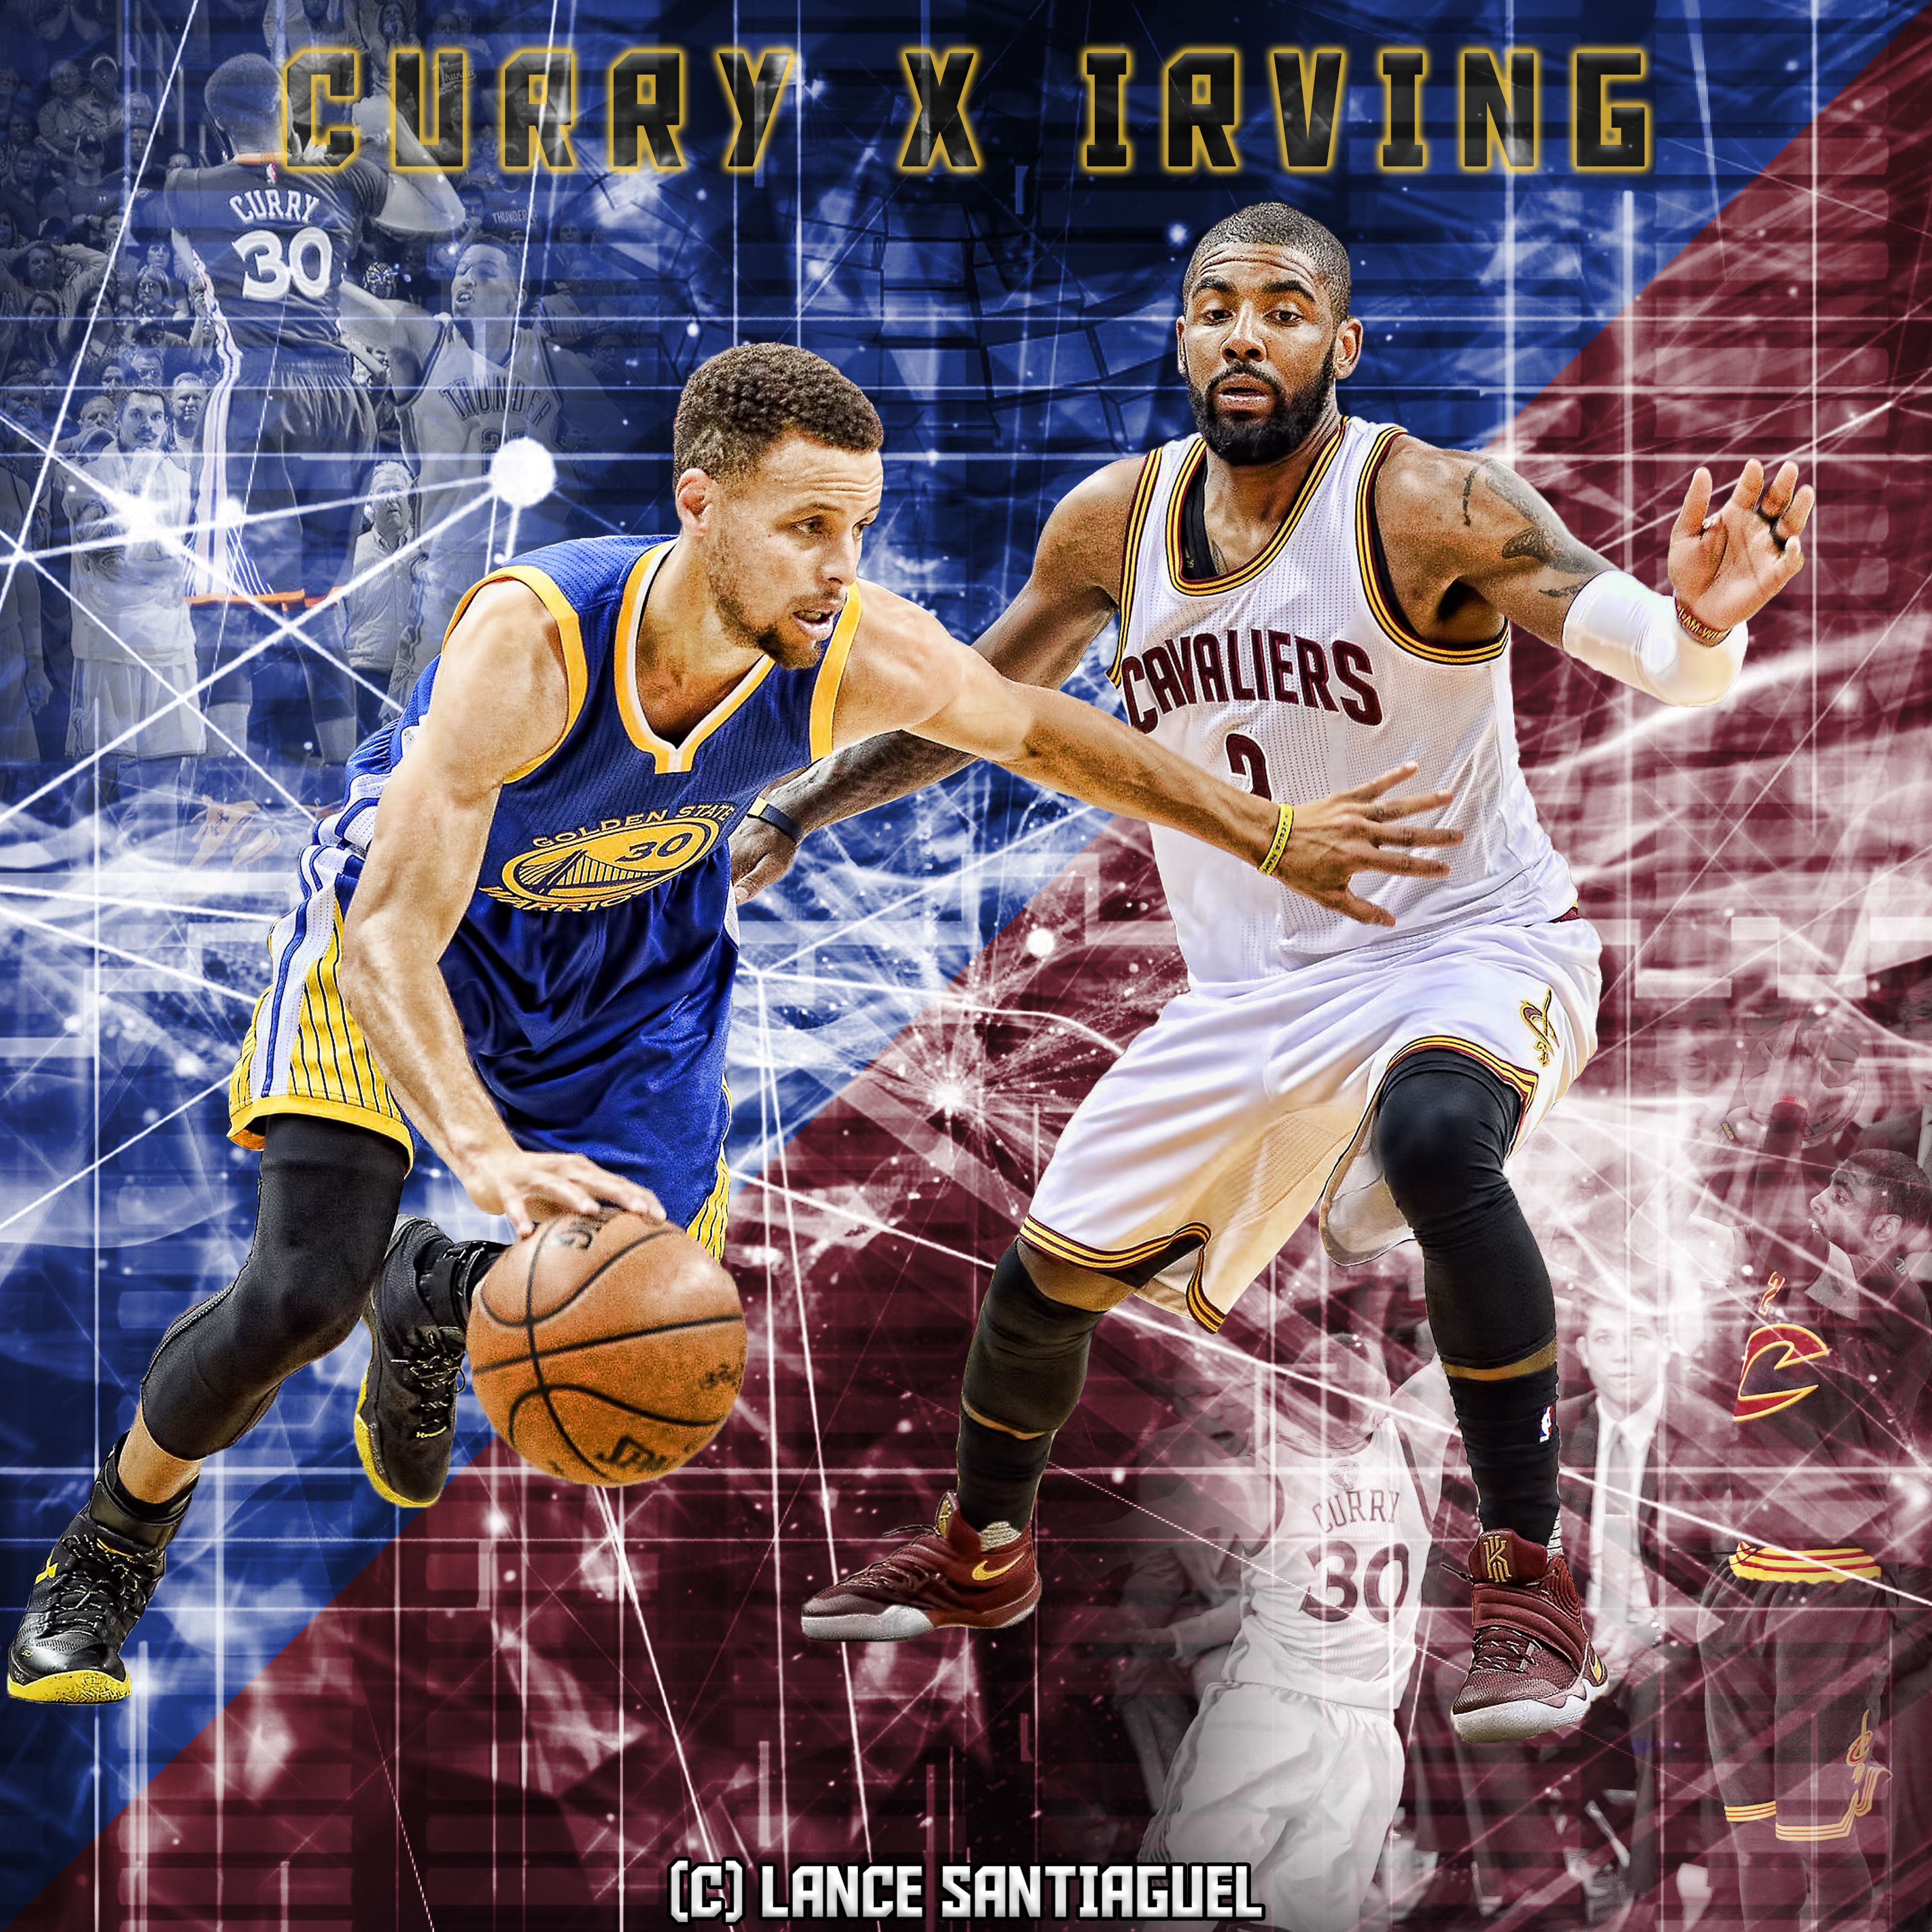 Stephen Curry Vs Kyrie Irving by Lancetastic27.